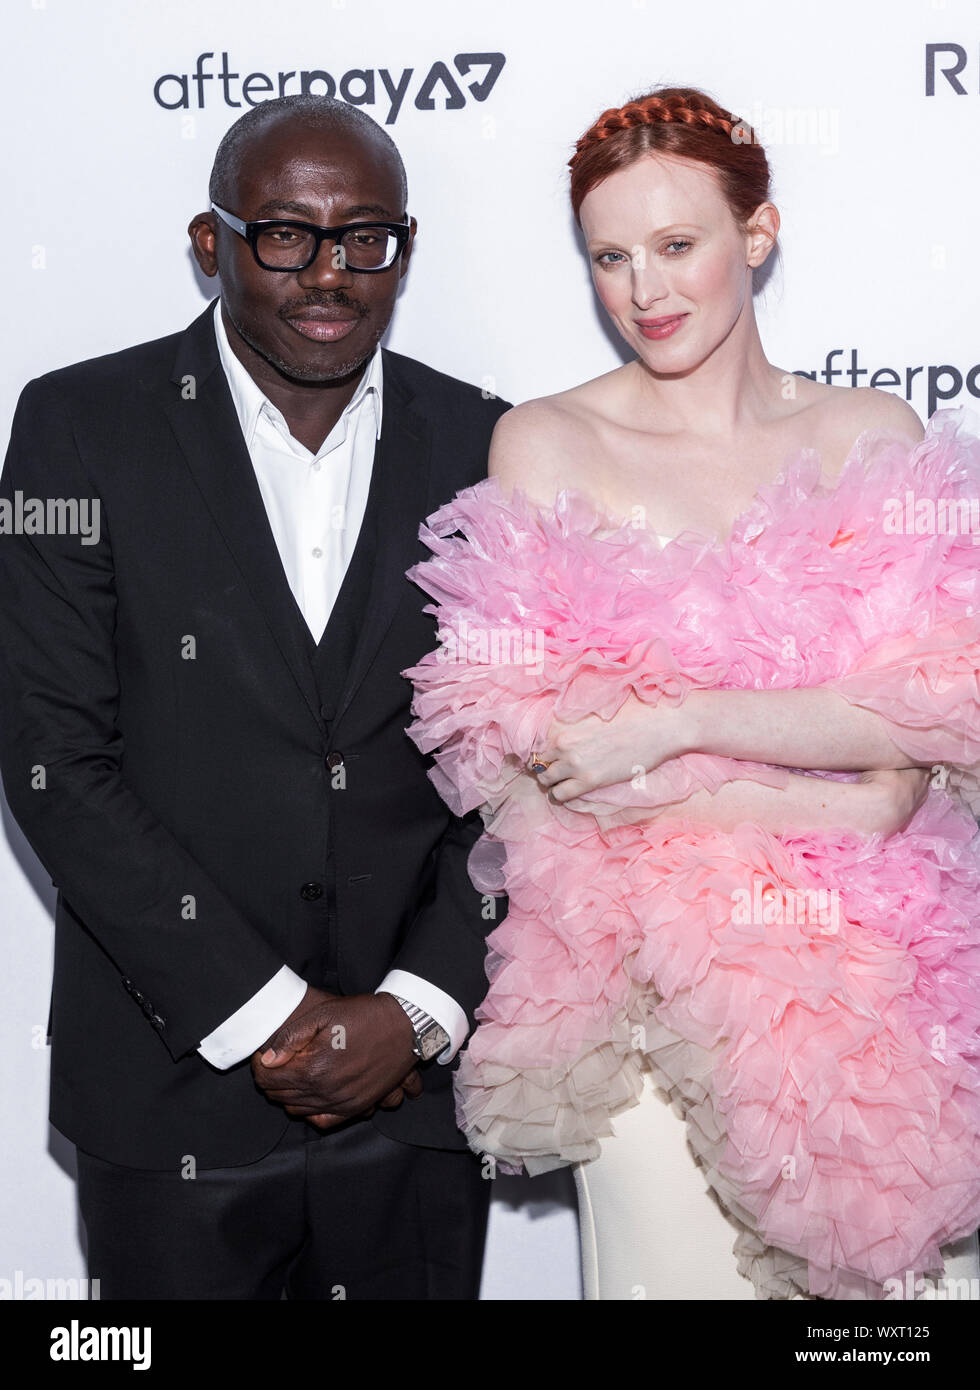 New York, NY, USA - September 5, 2019: Edward Enninful and Karen Elson attend The Daily Front Row 7th Fashion Media Awards at The Rainbow Room at Rock Stock Photo